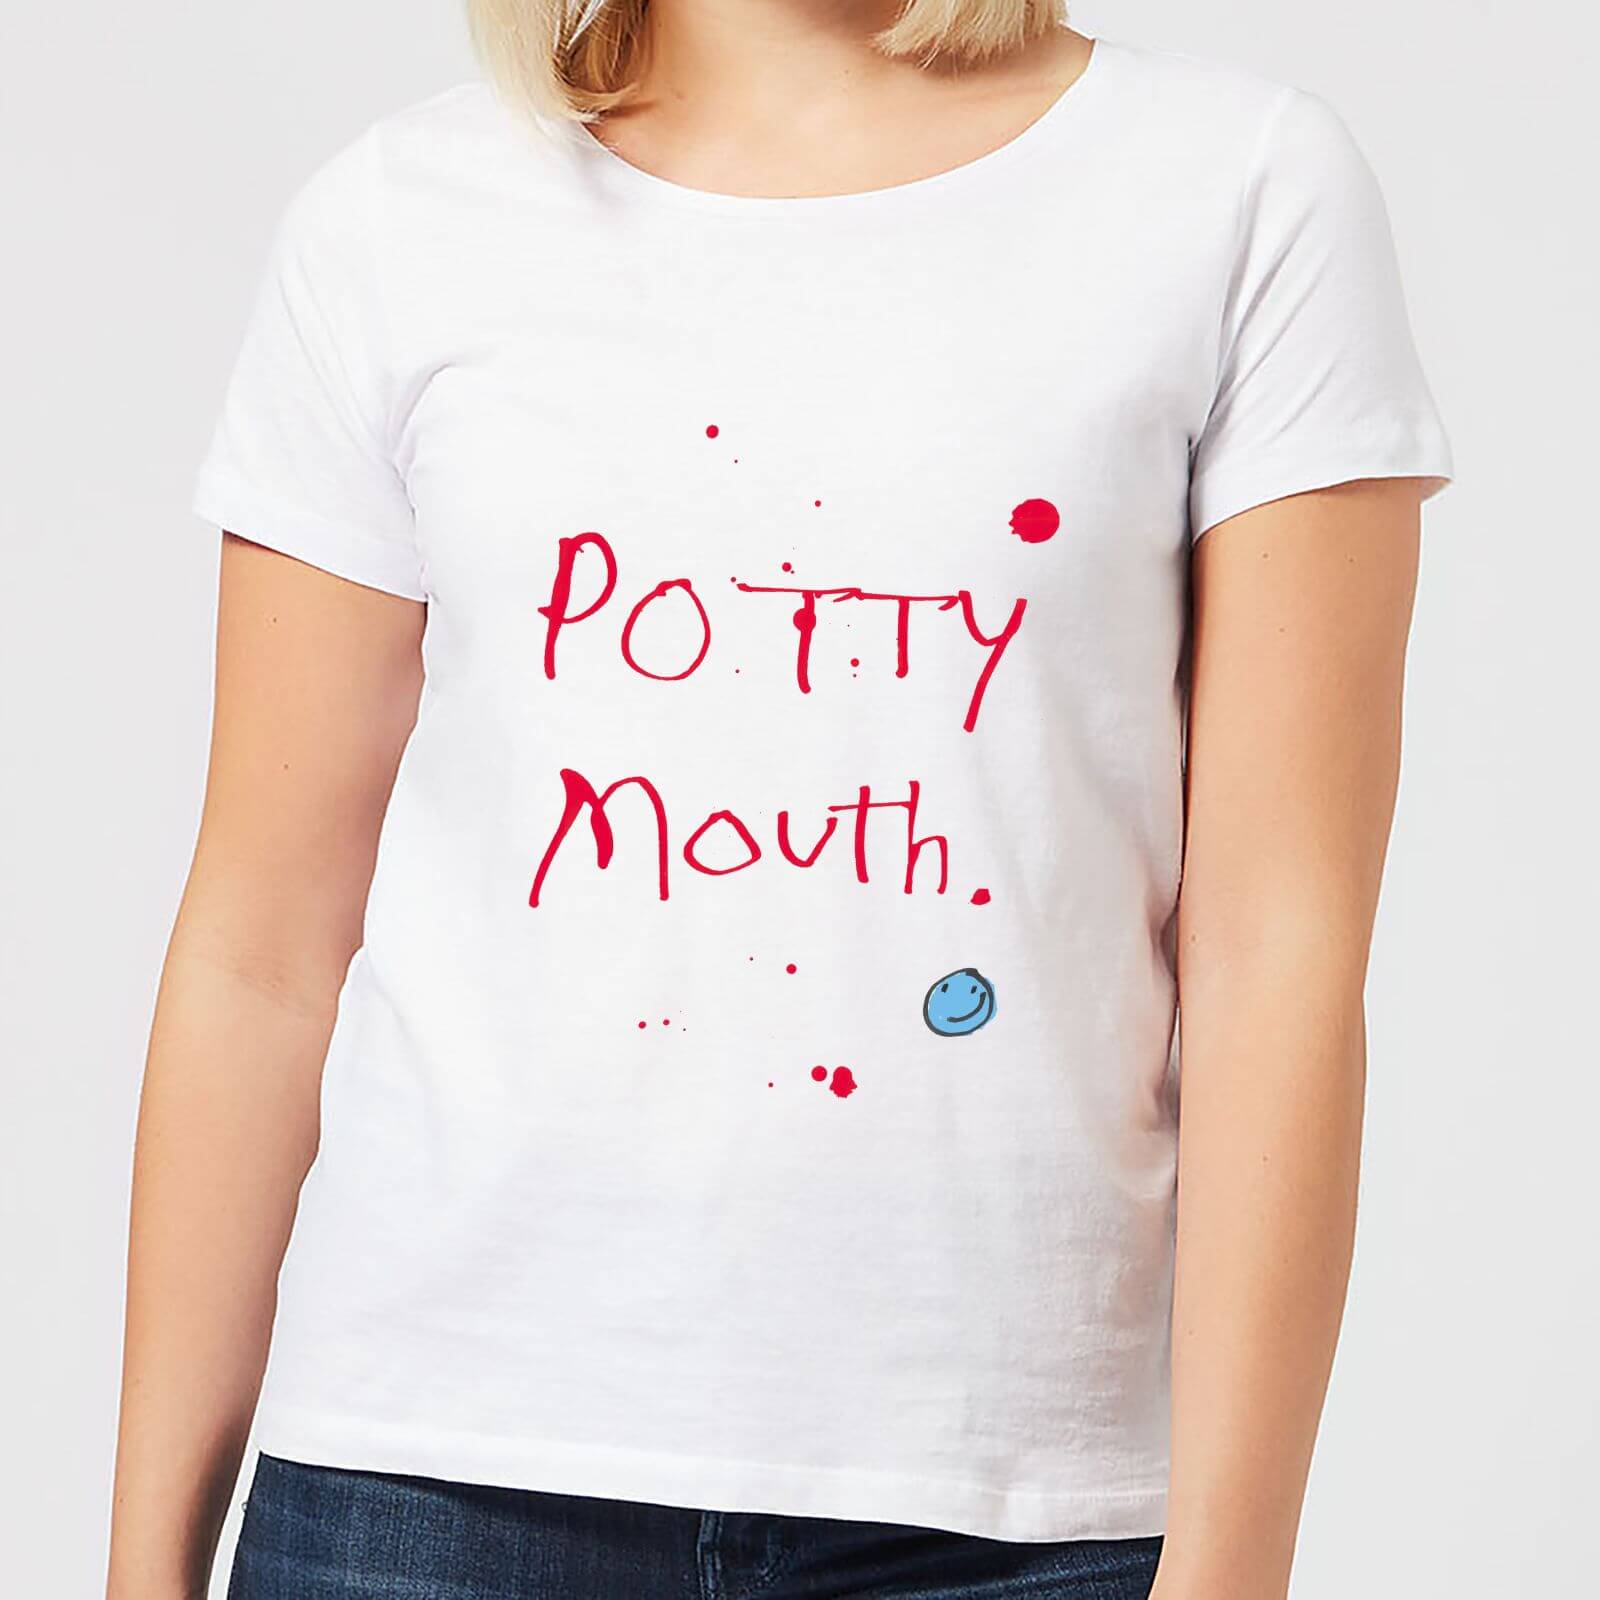 Poet and Painter Potty Mouth Women's T-Shirt - White - S - White